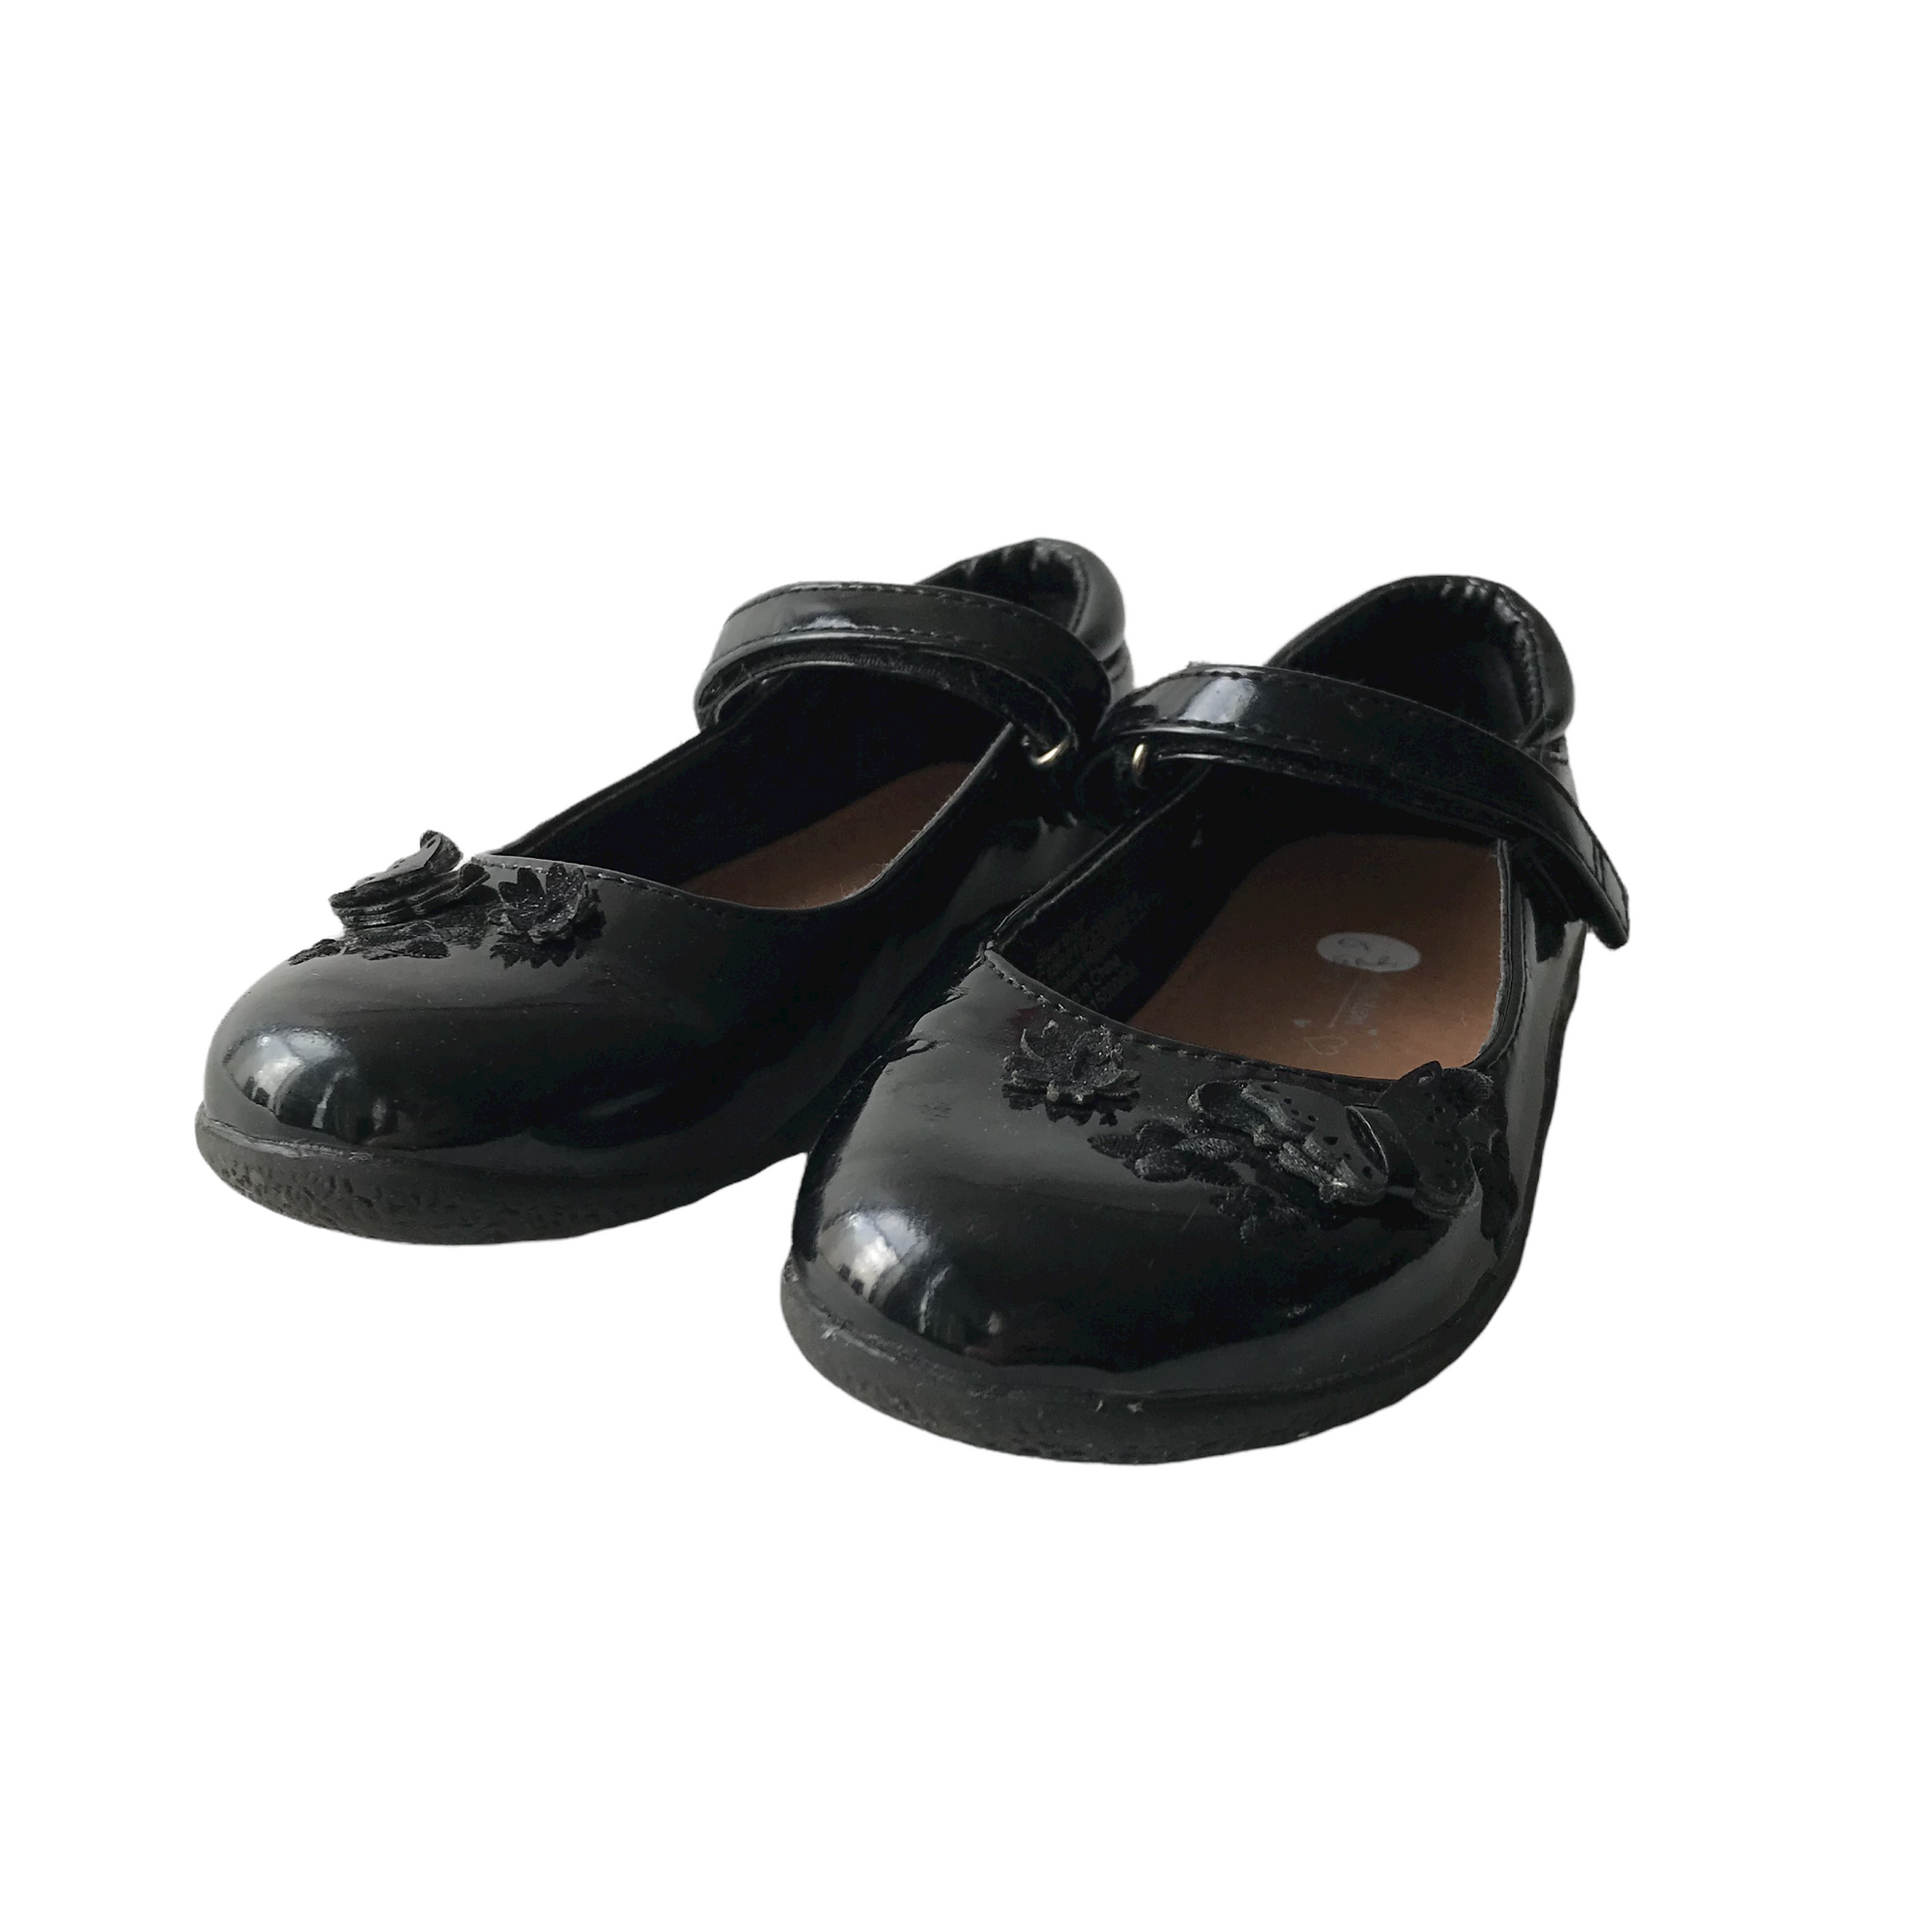 Boys Real Leather Formal School Shoes - Black - Size 4 - Matalan